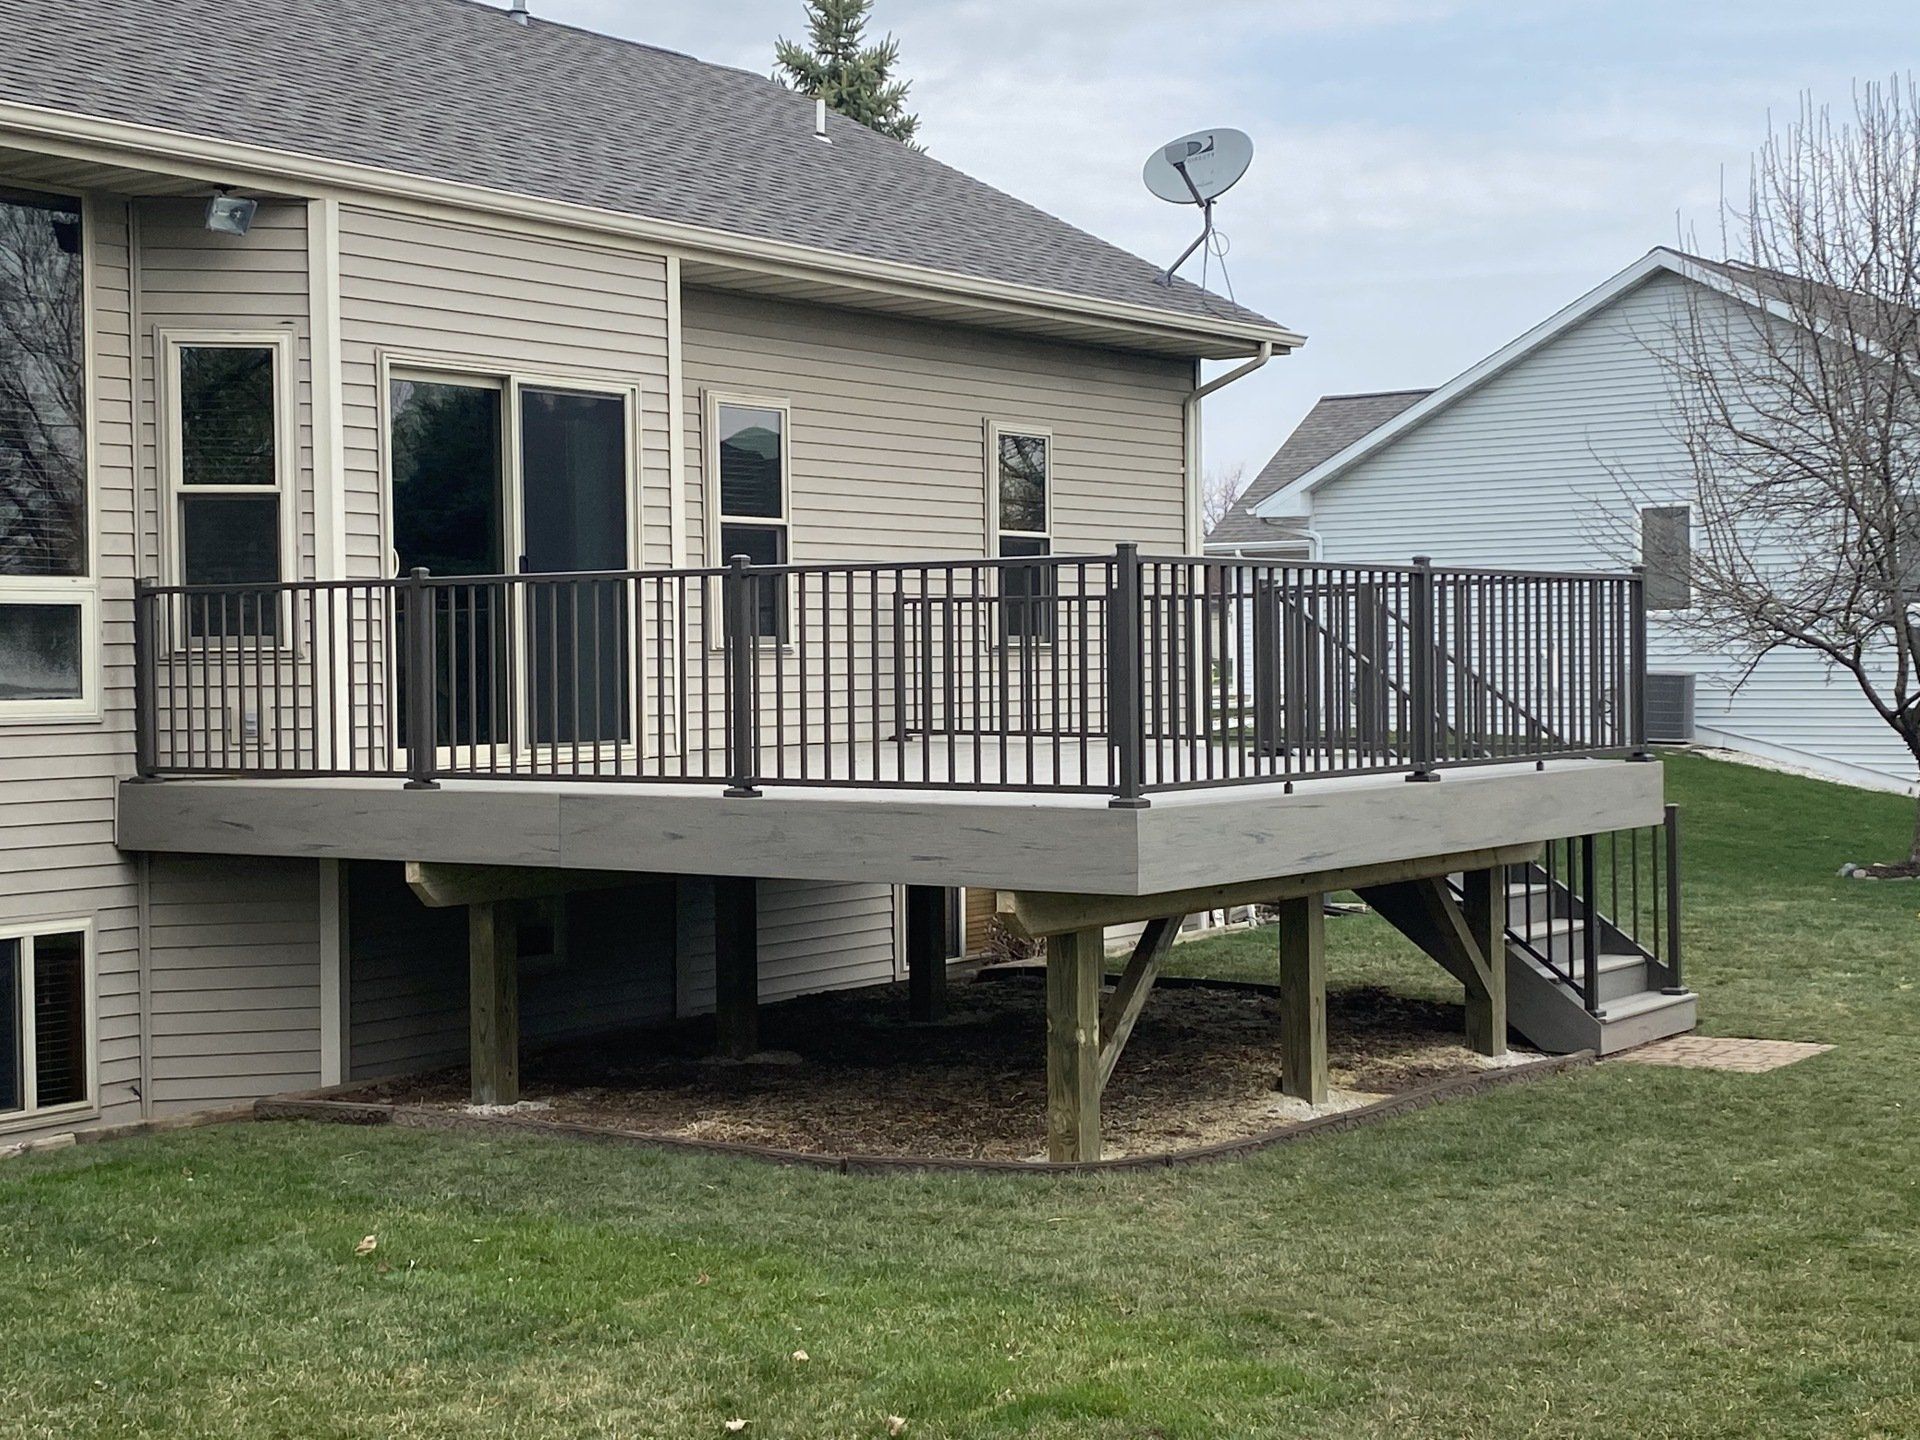 A large deck with stairs is in the backyard of a house.